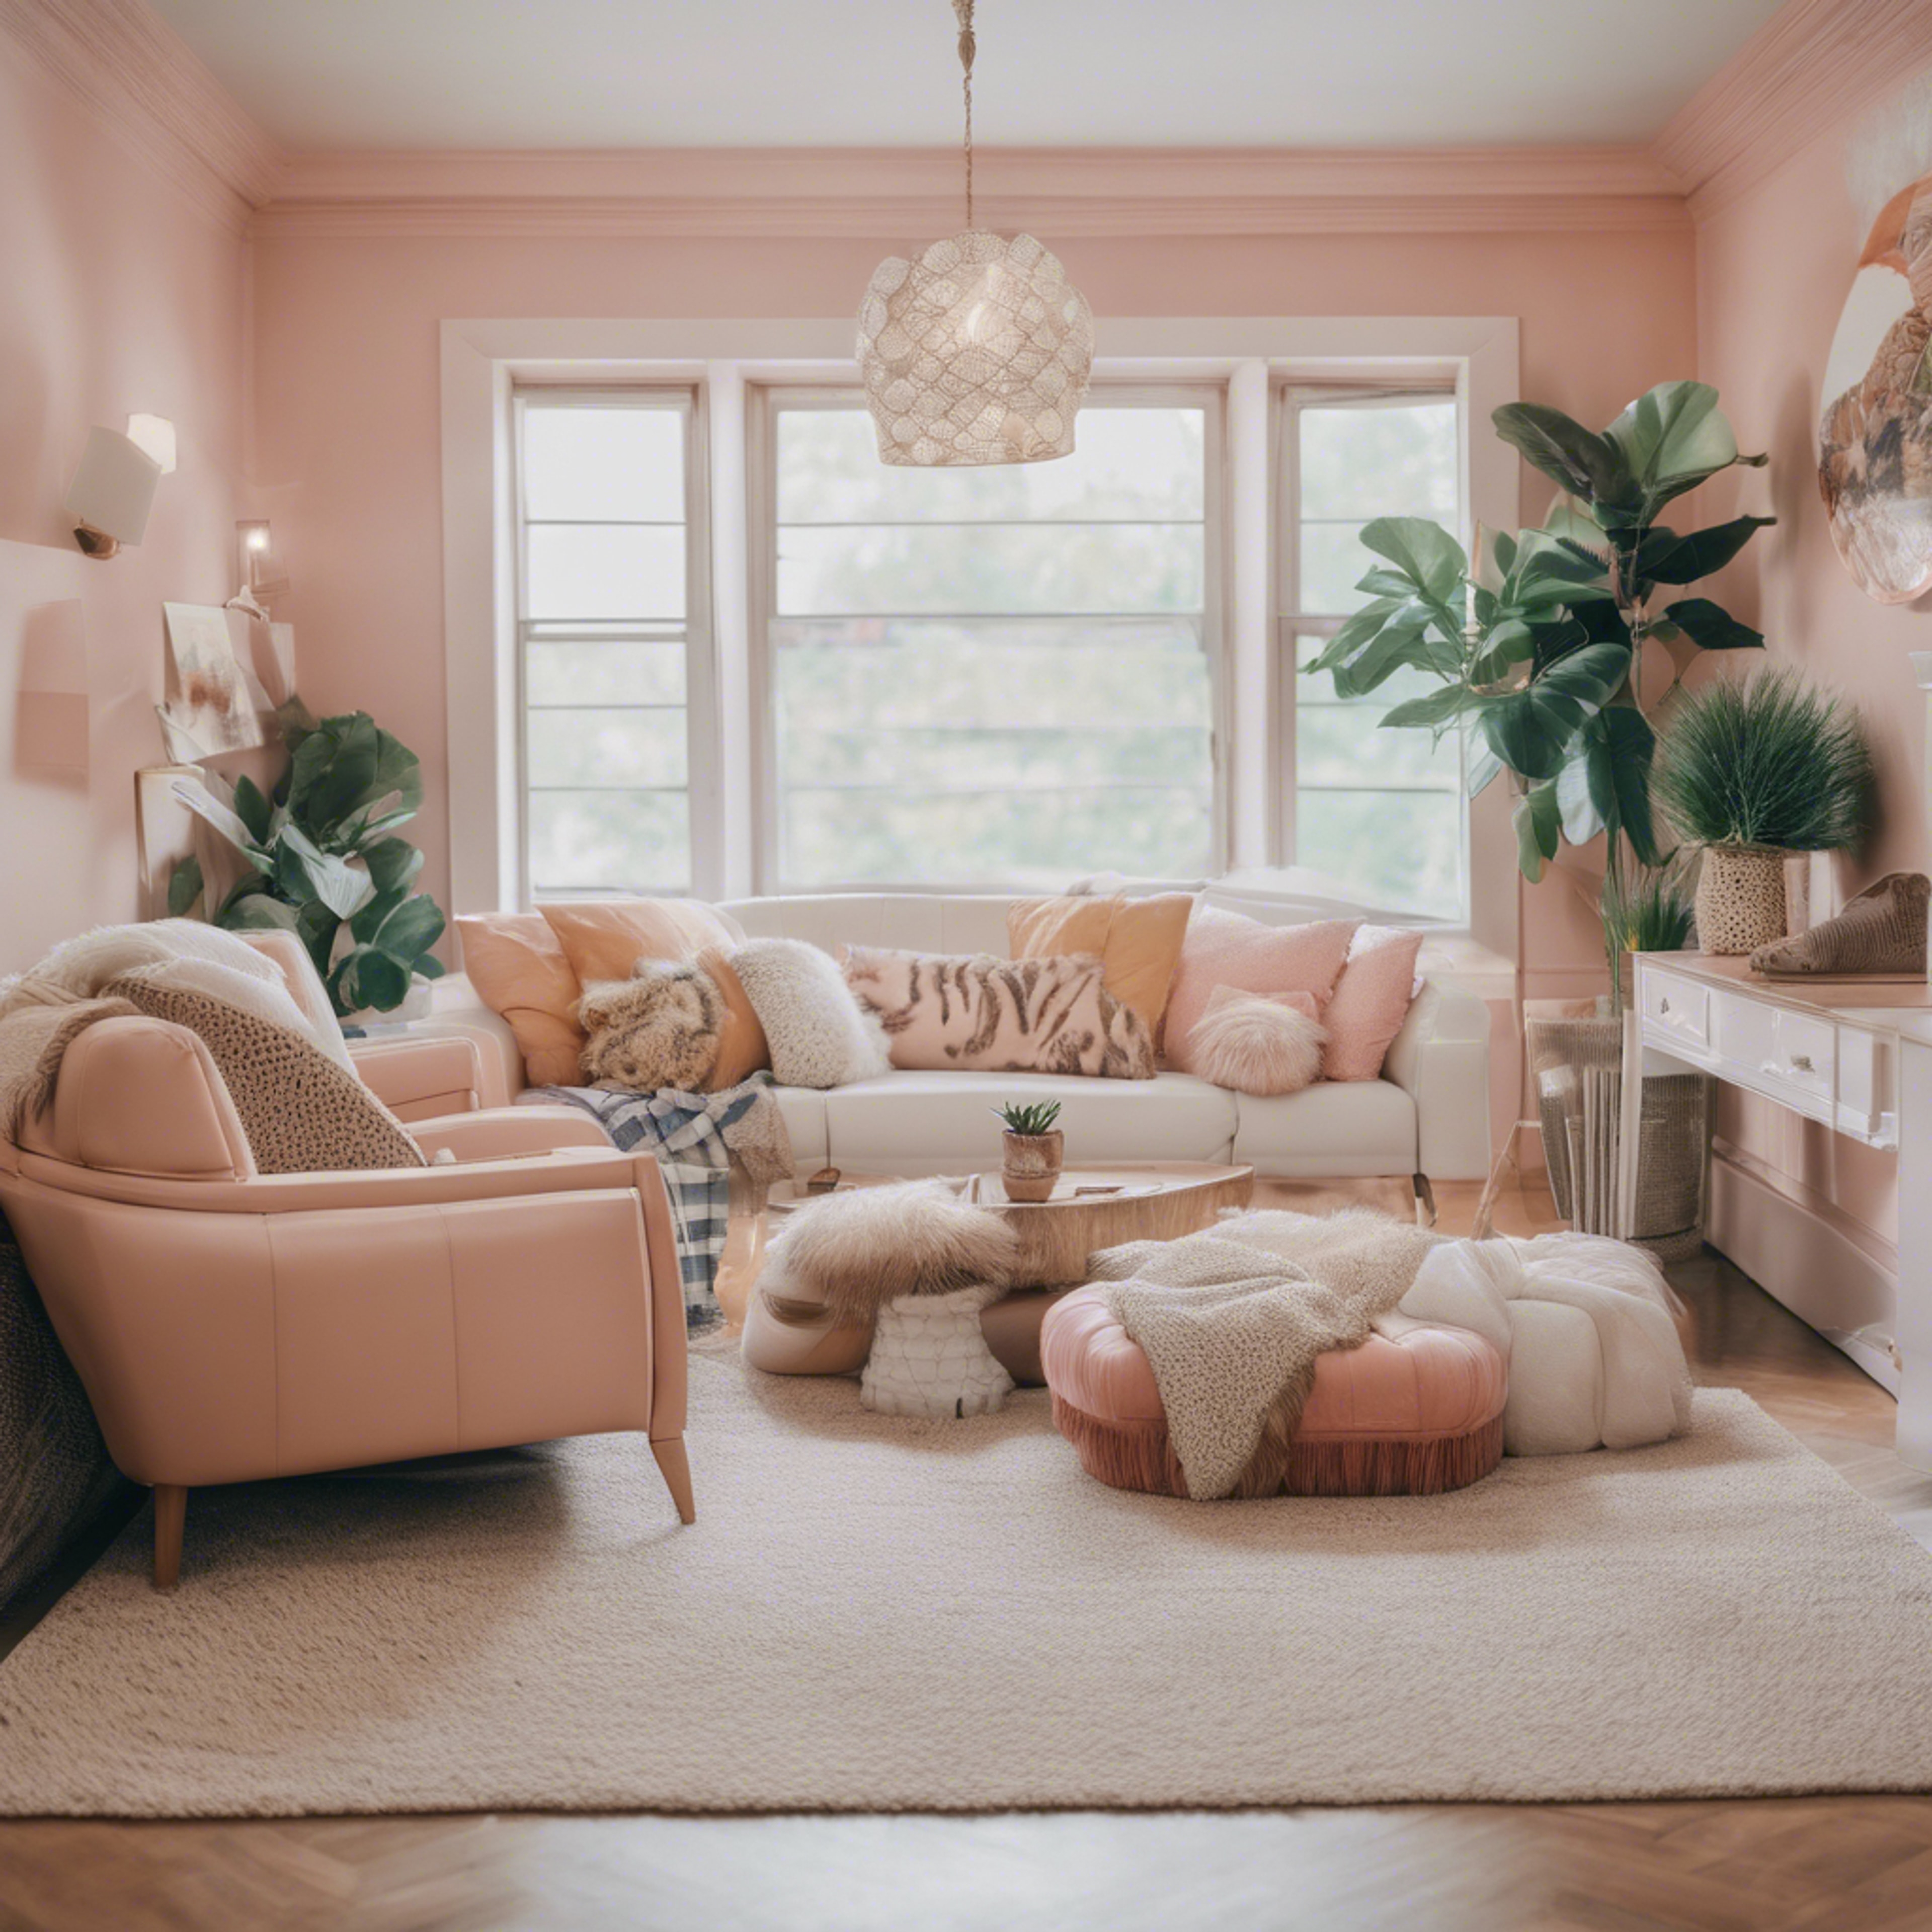 A tastefully decorated preppy aesthetic interior with animal prints, plaids, and pastel colors. Тапет[013da7e2e0464972ad87]